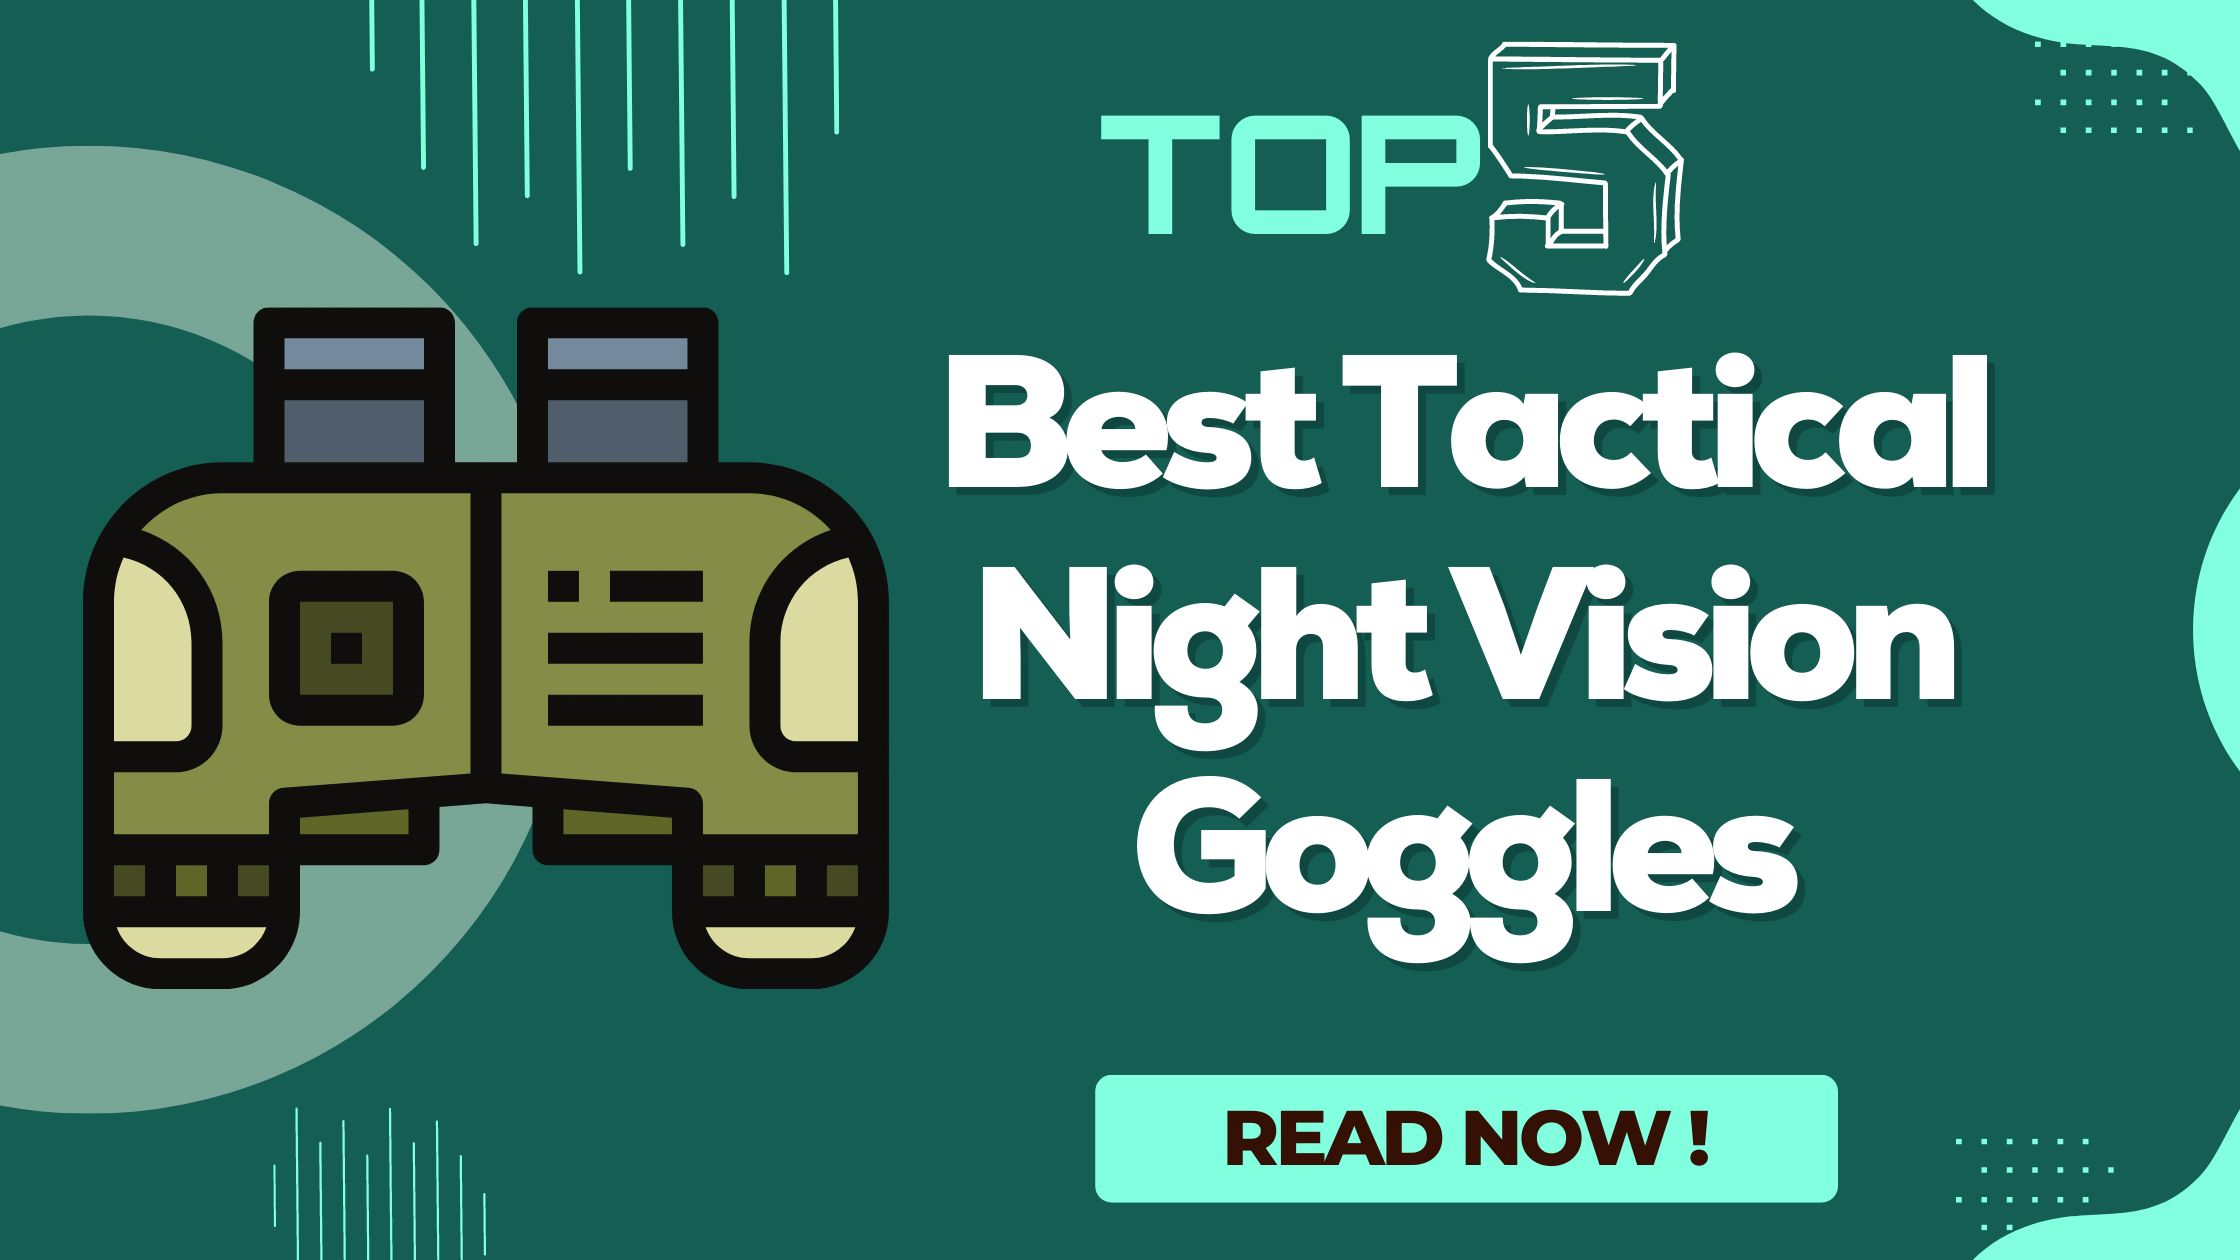 Best Tactical Night Vision Goggles